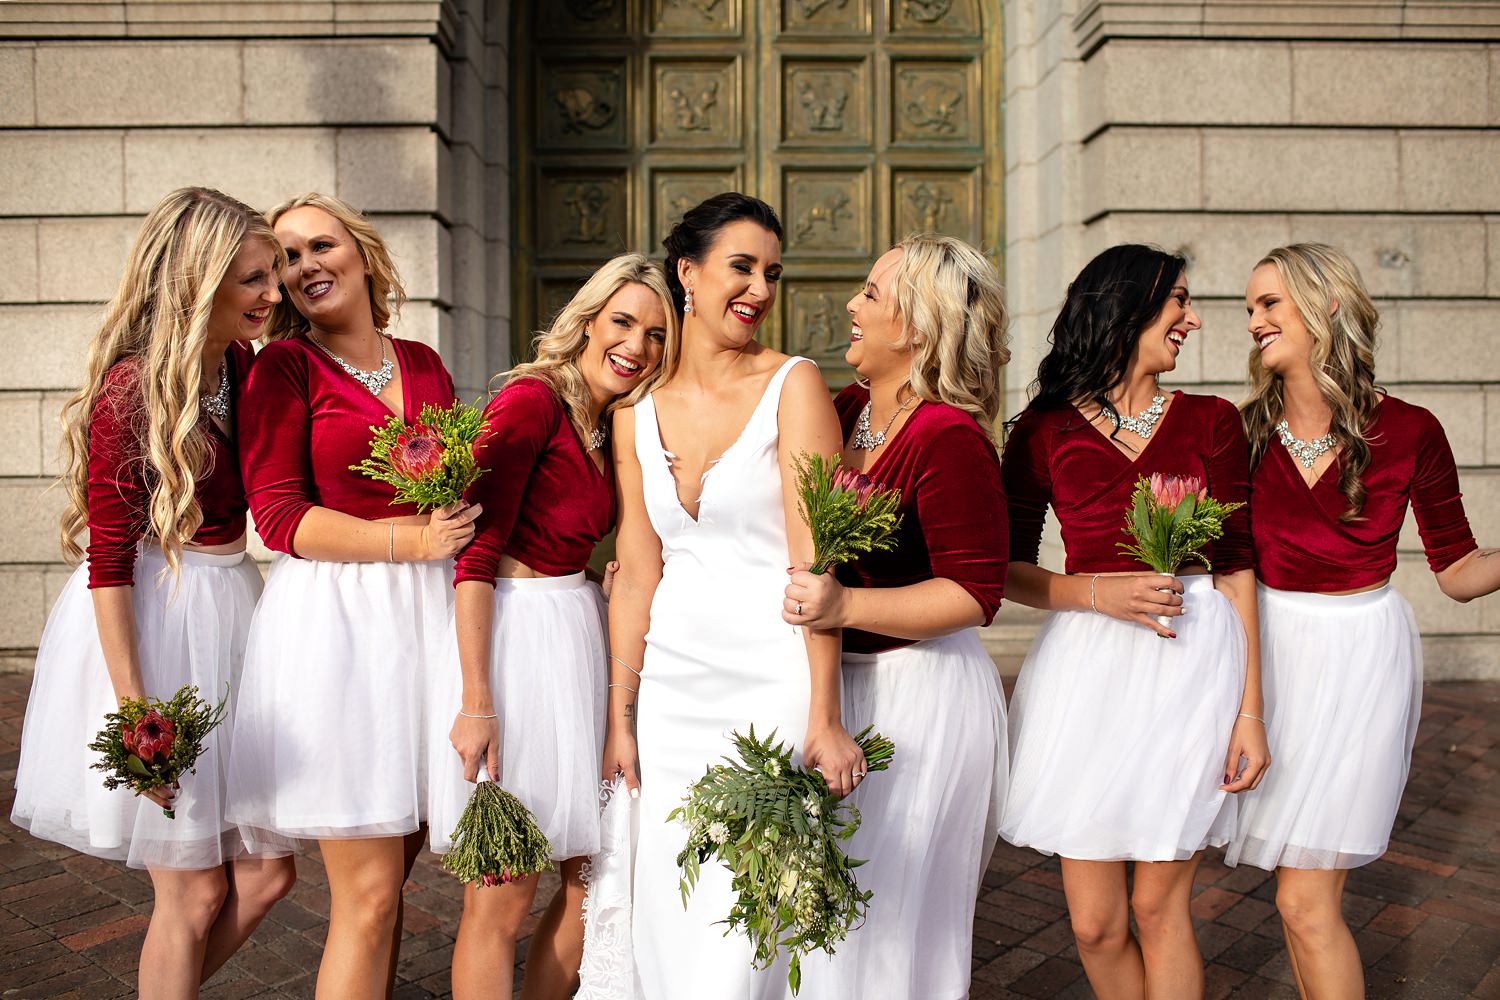 A beautiful moments with bride and bridesmaids at and inner city wedding in port elizabeth with maroon and white two piece bridesmaid dresses by wedding photographer in South Africa, Niki M Photography